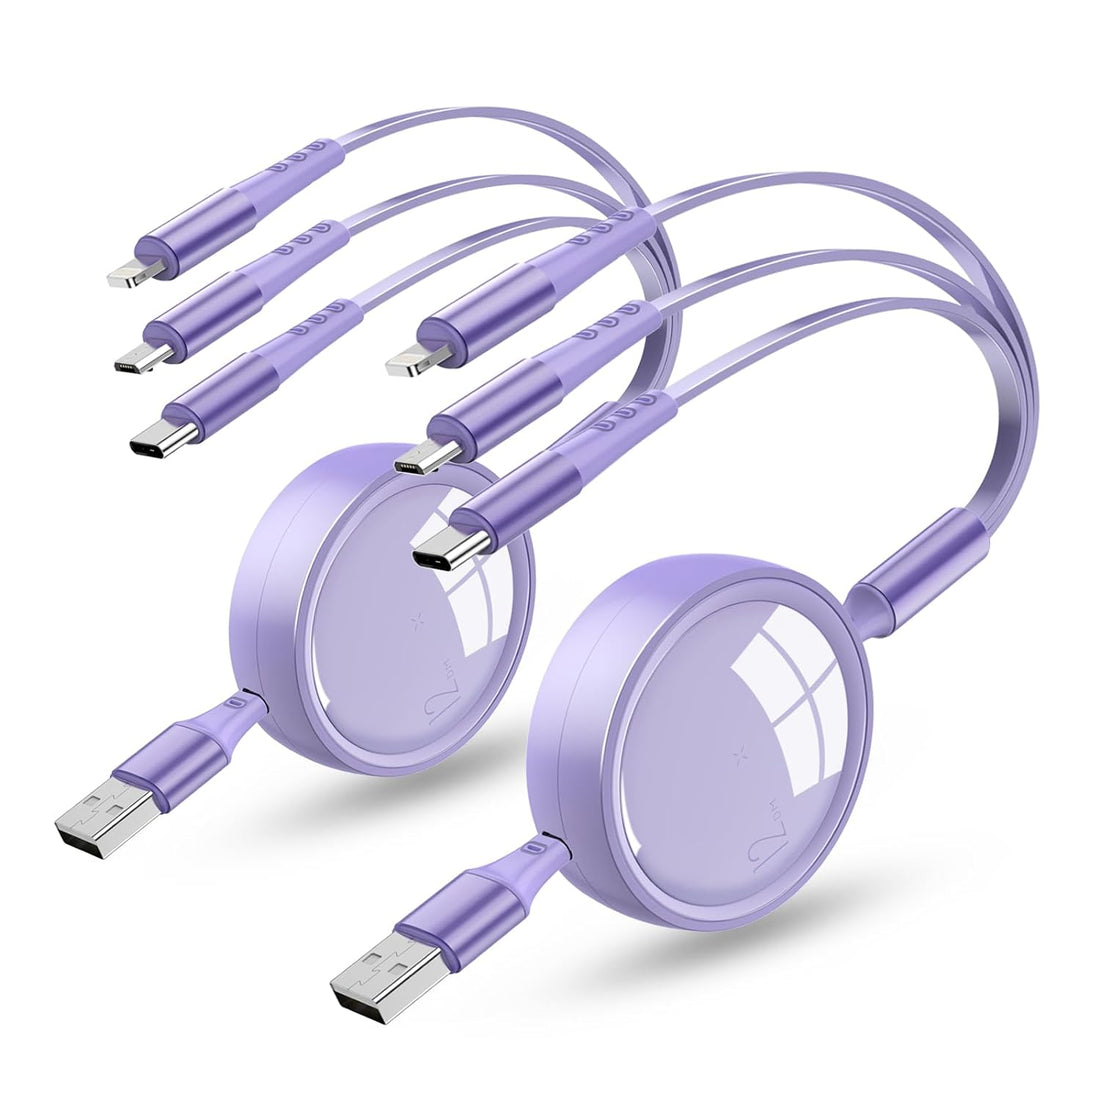 KIYODA 3 in 1 Charging Cable 2Pack